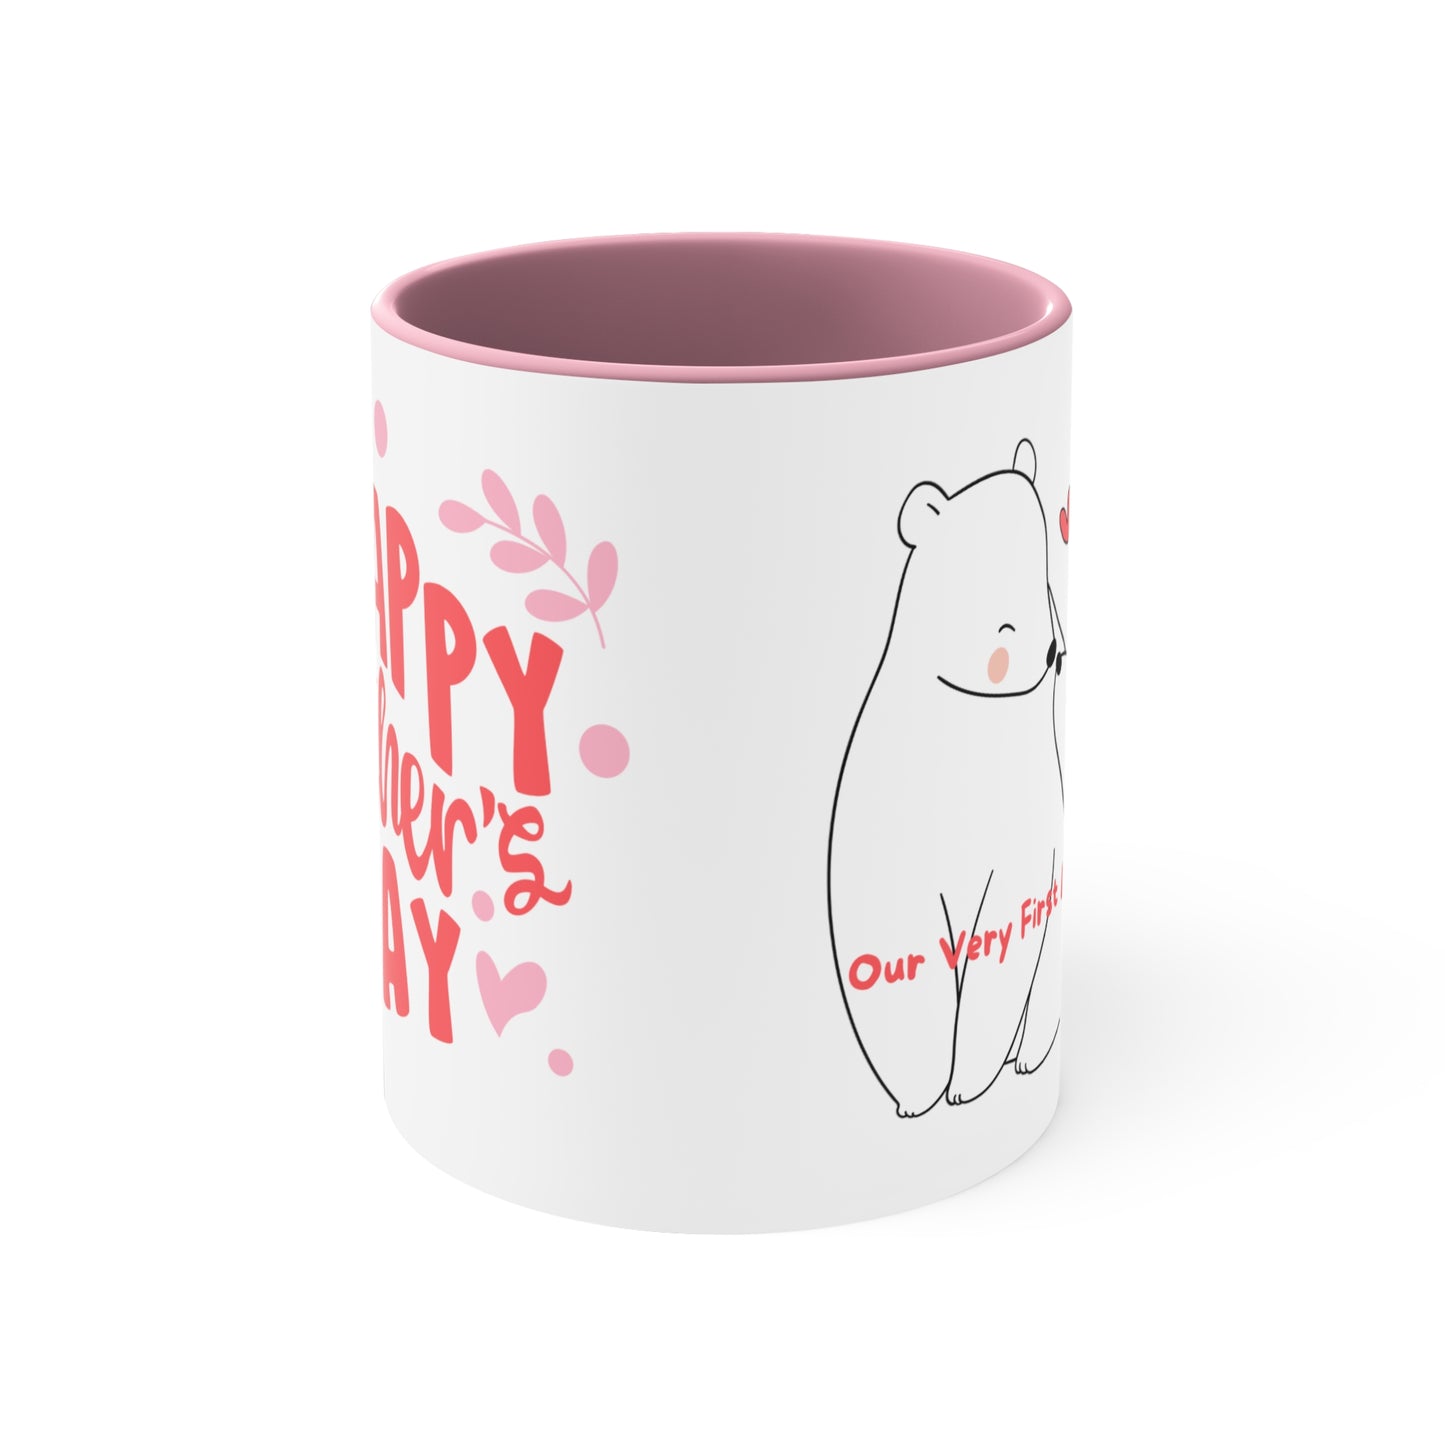 Happy Mother's Day/ Bear Accent Coffee Mug, 11oz